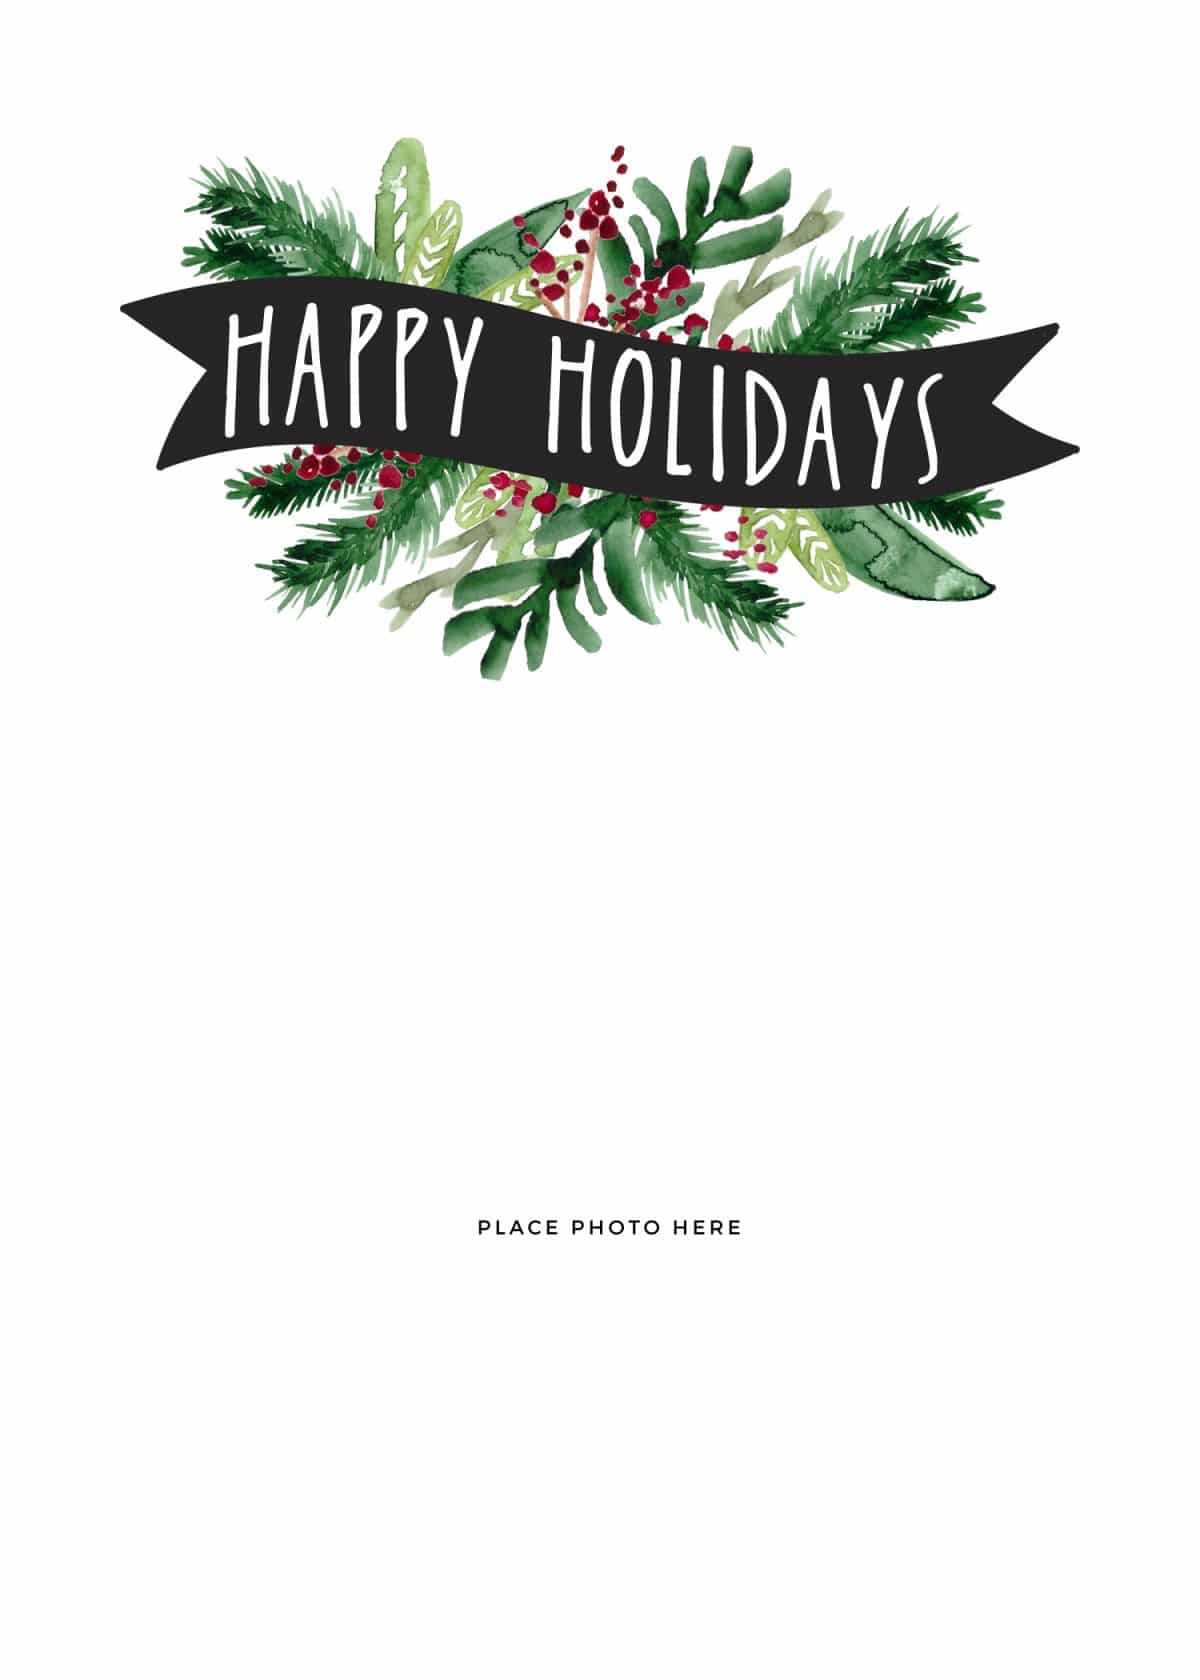 Make Your Own Photo Christmas Cards (For Free!) - Somewhat With Regard To Print Your Own Christmas Cards Templates